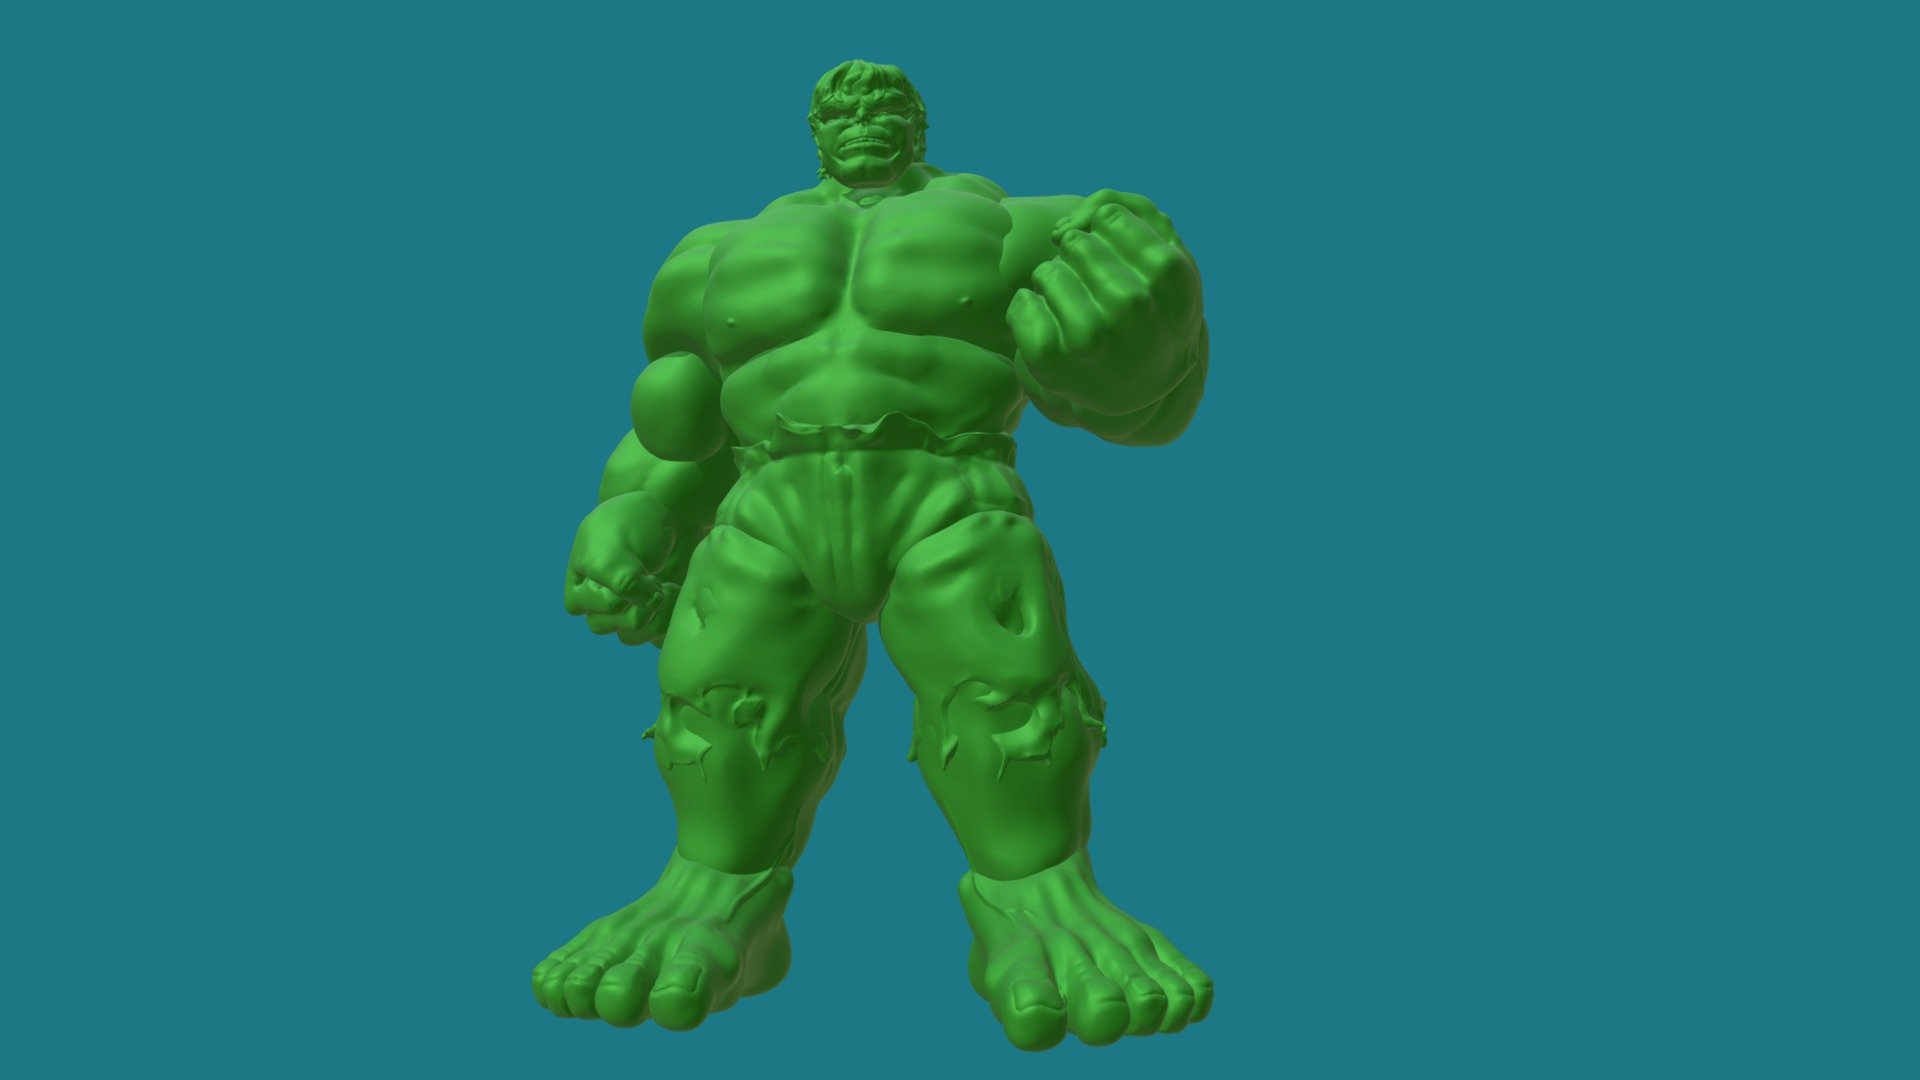 Strongest there is! Mixed version of old and new - Hulk - 3D model by Mr Jay (@mrjay) 3d model